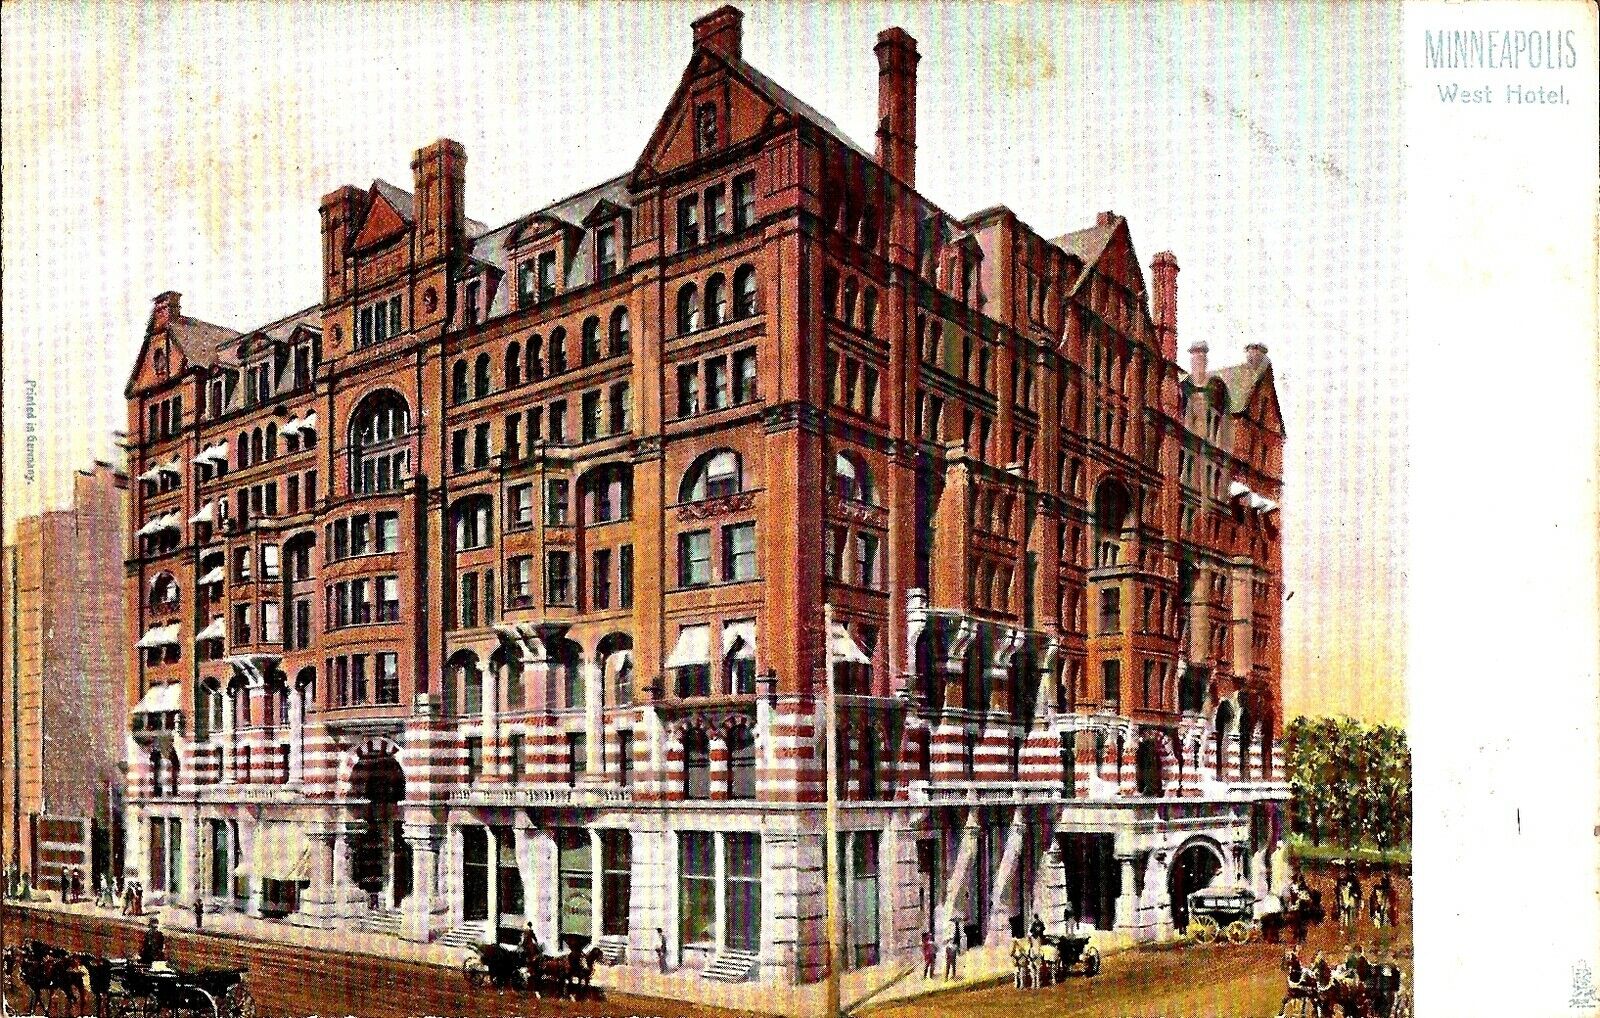 Minneapolis, MINNESOTA - West Hotel - ARCHITECTURE - horse & buggy